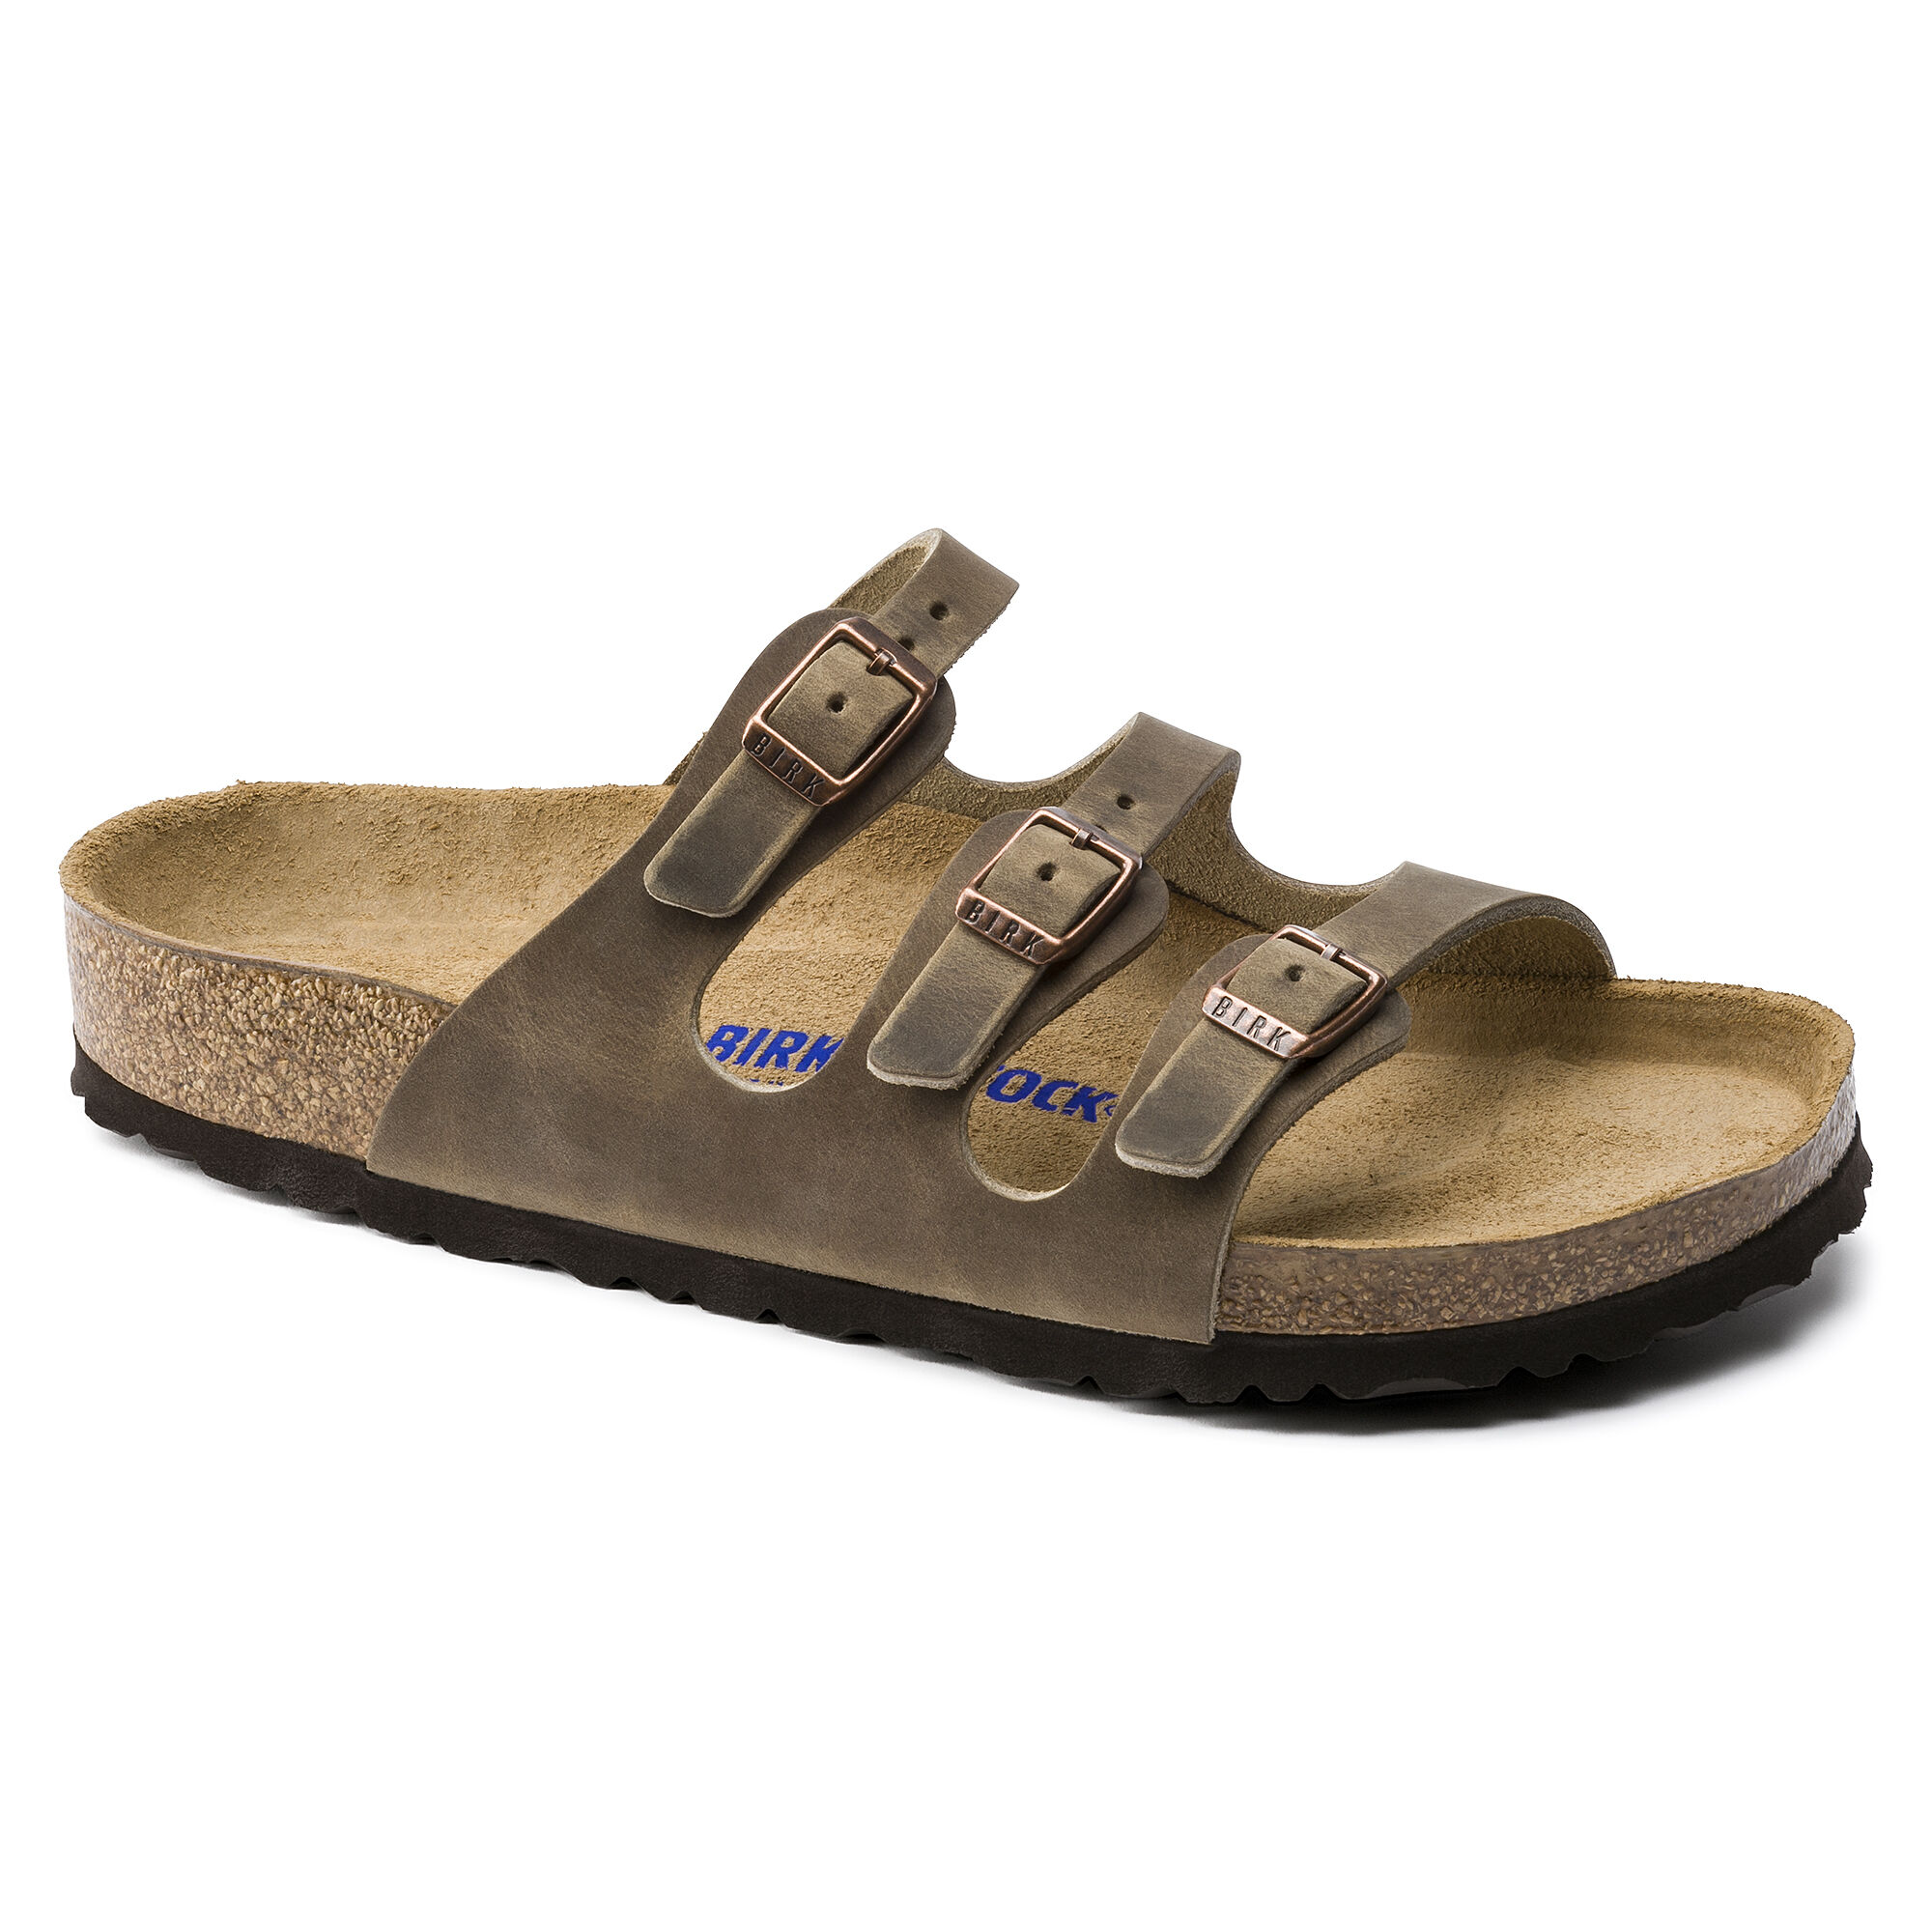 Women's Florida Soft Foot Bed Tobacco Brown